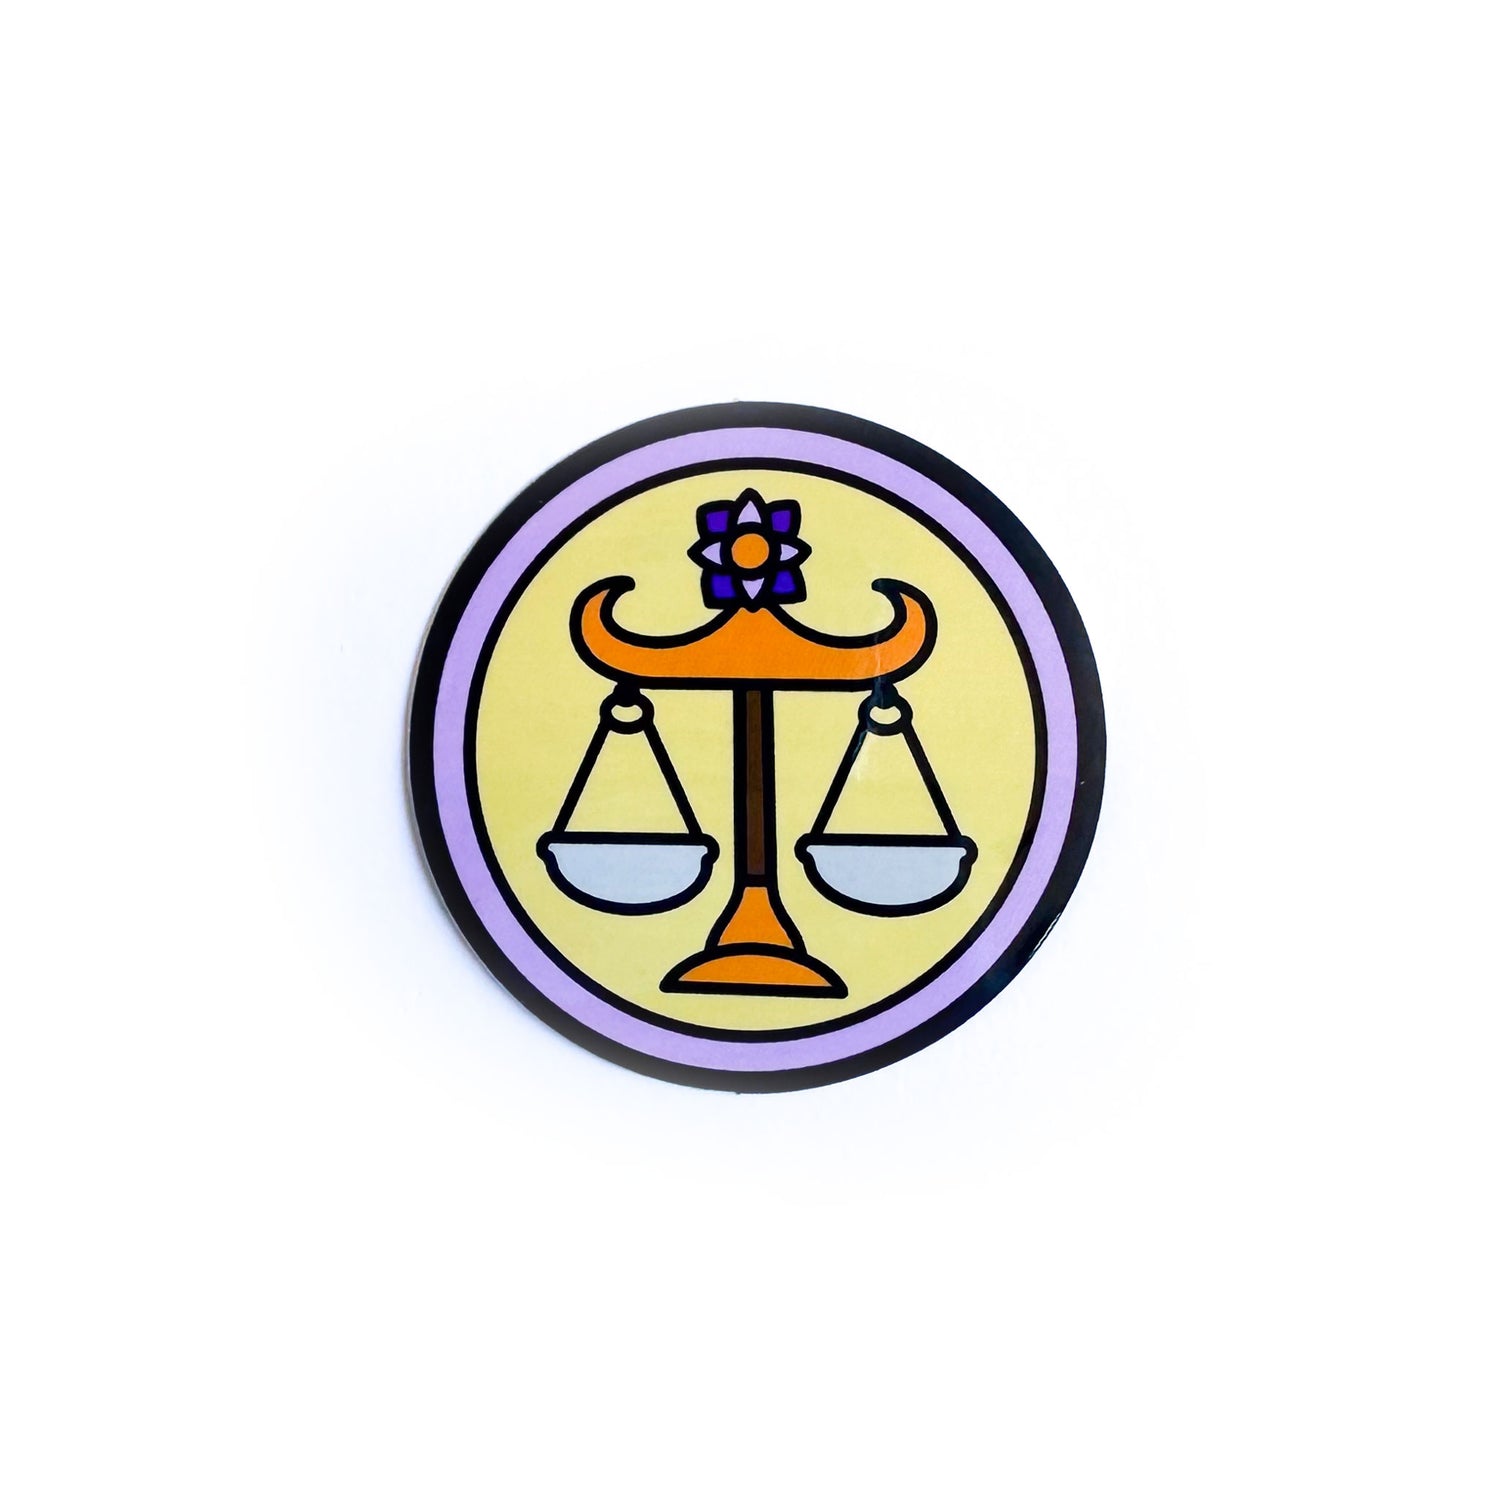 A sticker of a yellow circle with a lavender border with a cute drawing of the scales of justice representing the Libra zodiac sign in the center of the yellow circle. 